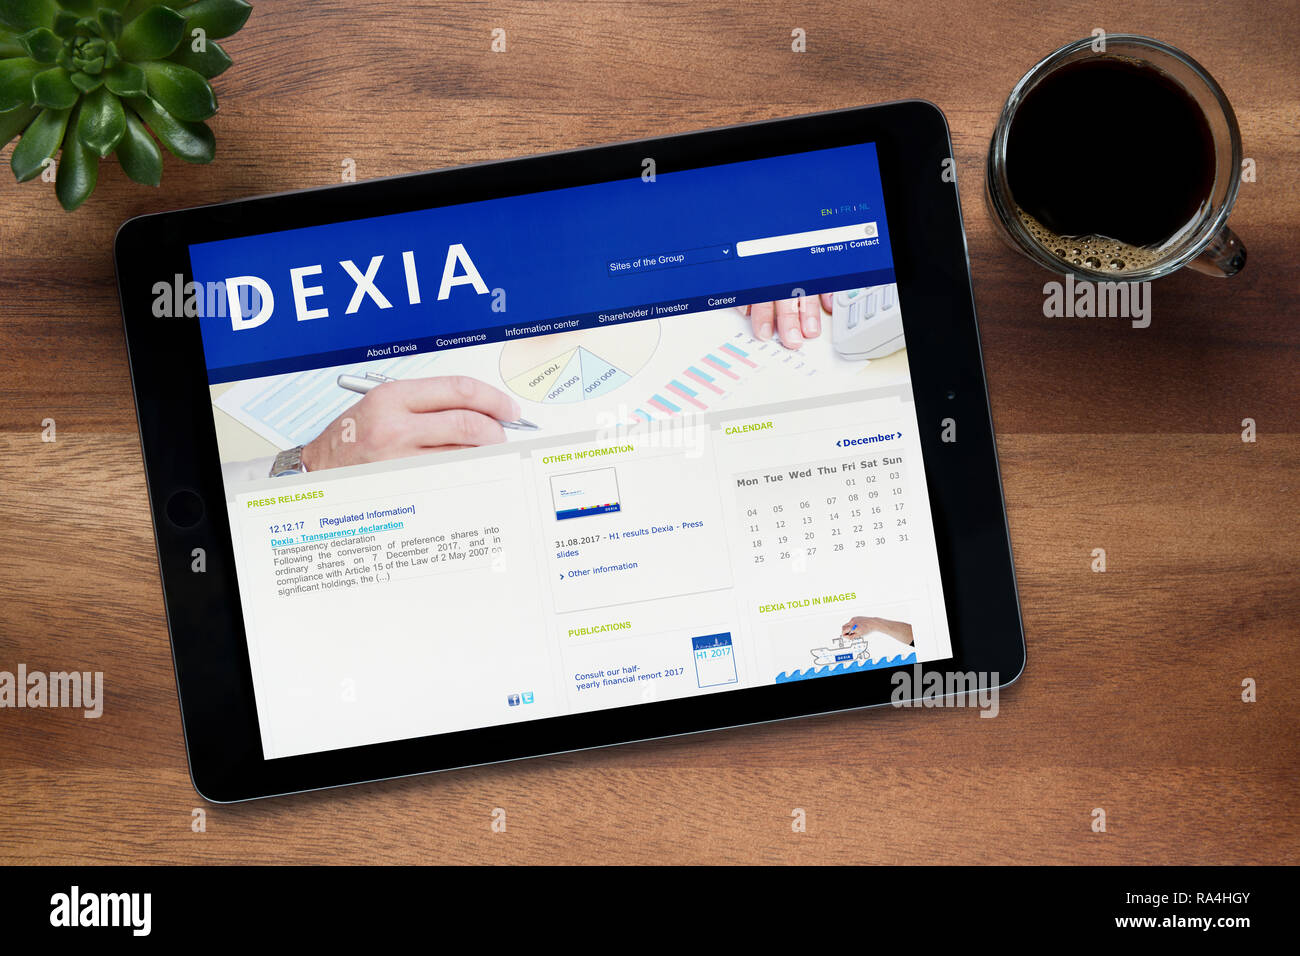 The website of Dexia Group is seen on an iPad tablet, on a wooden table along with an espresso coffee and a house plant (Editorial use only). Stock Photo